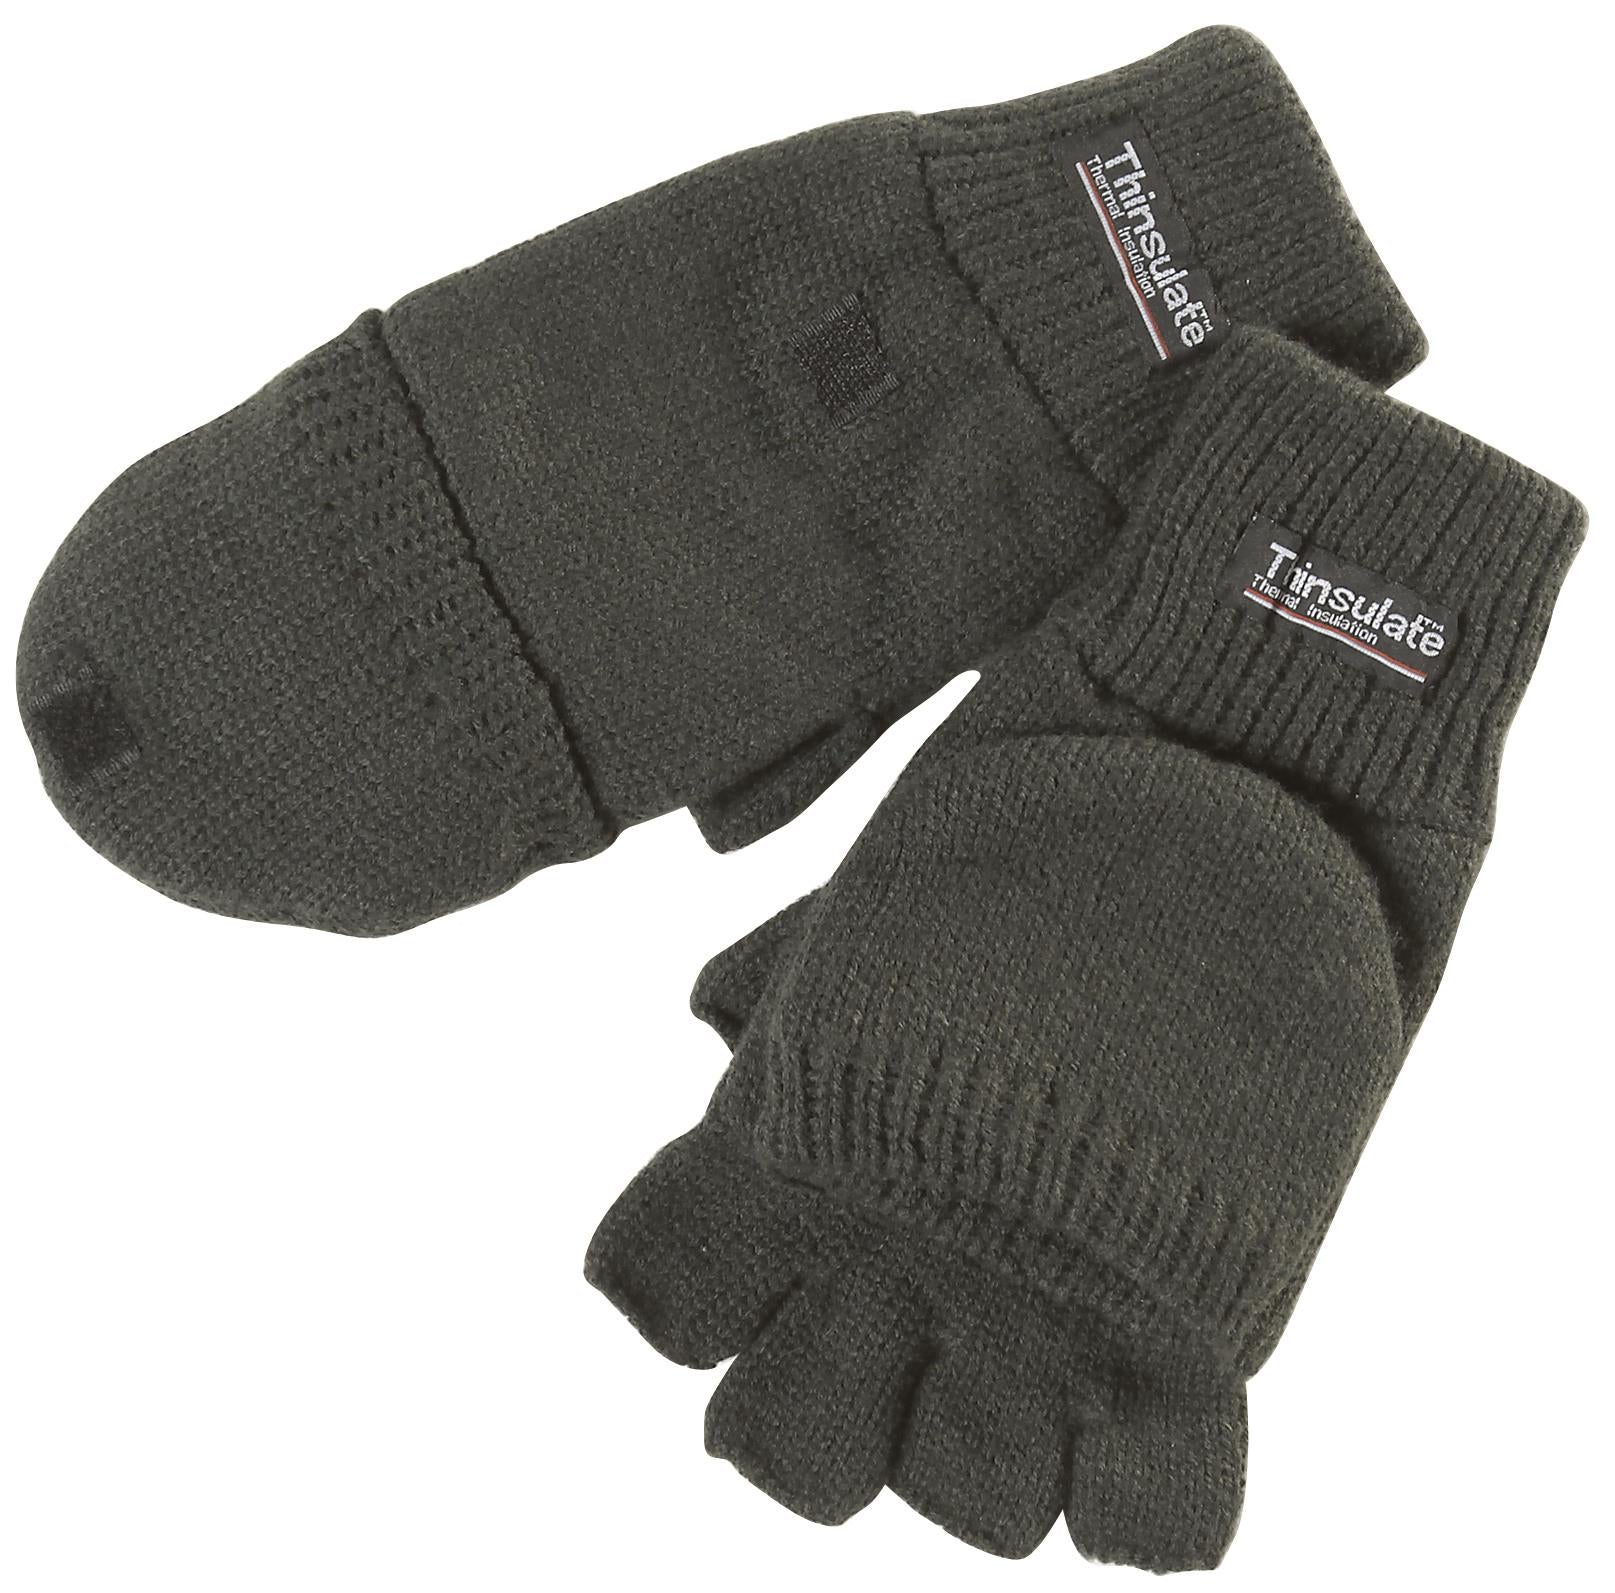 Fort Thinsulate thermal-lined olive green fleece winter shooters mitts #604